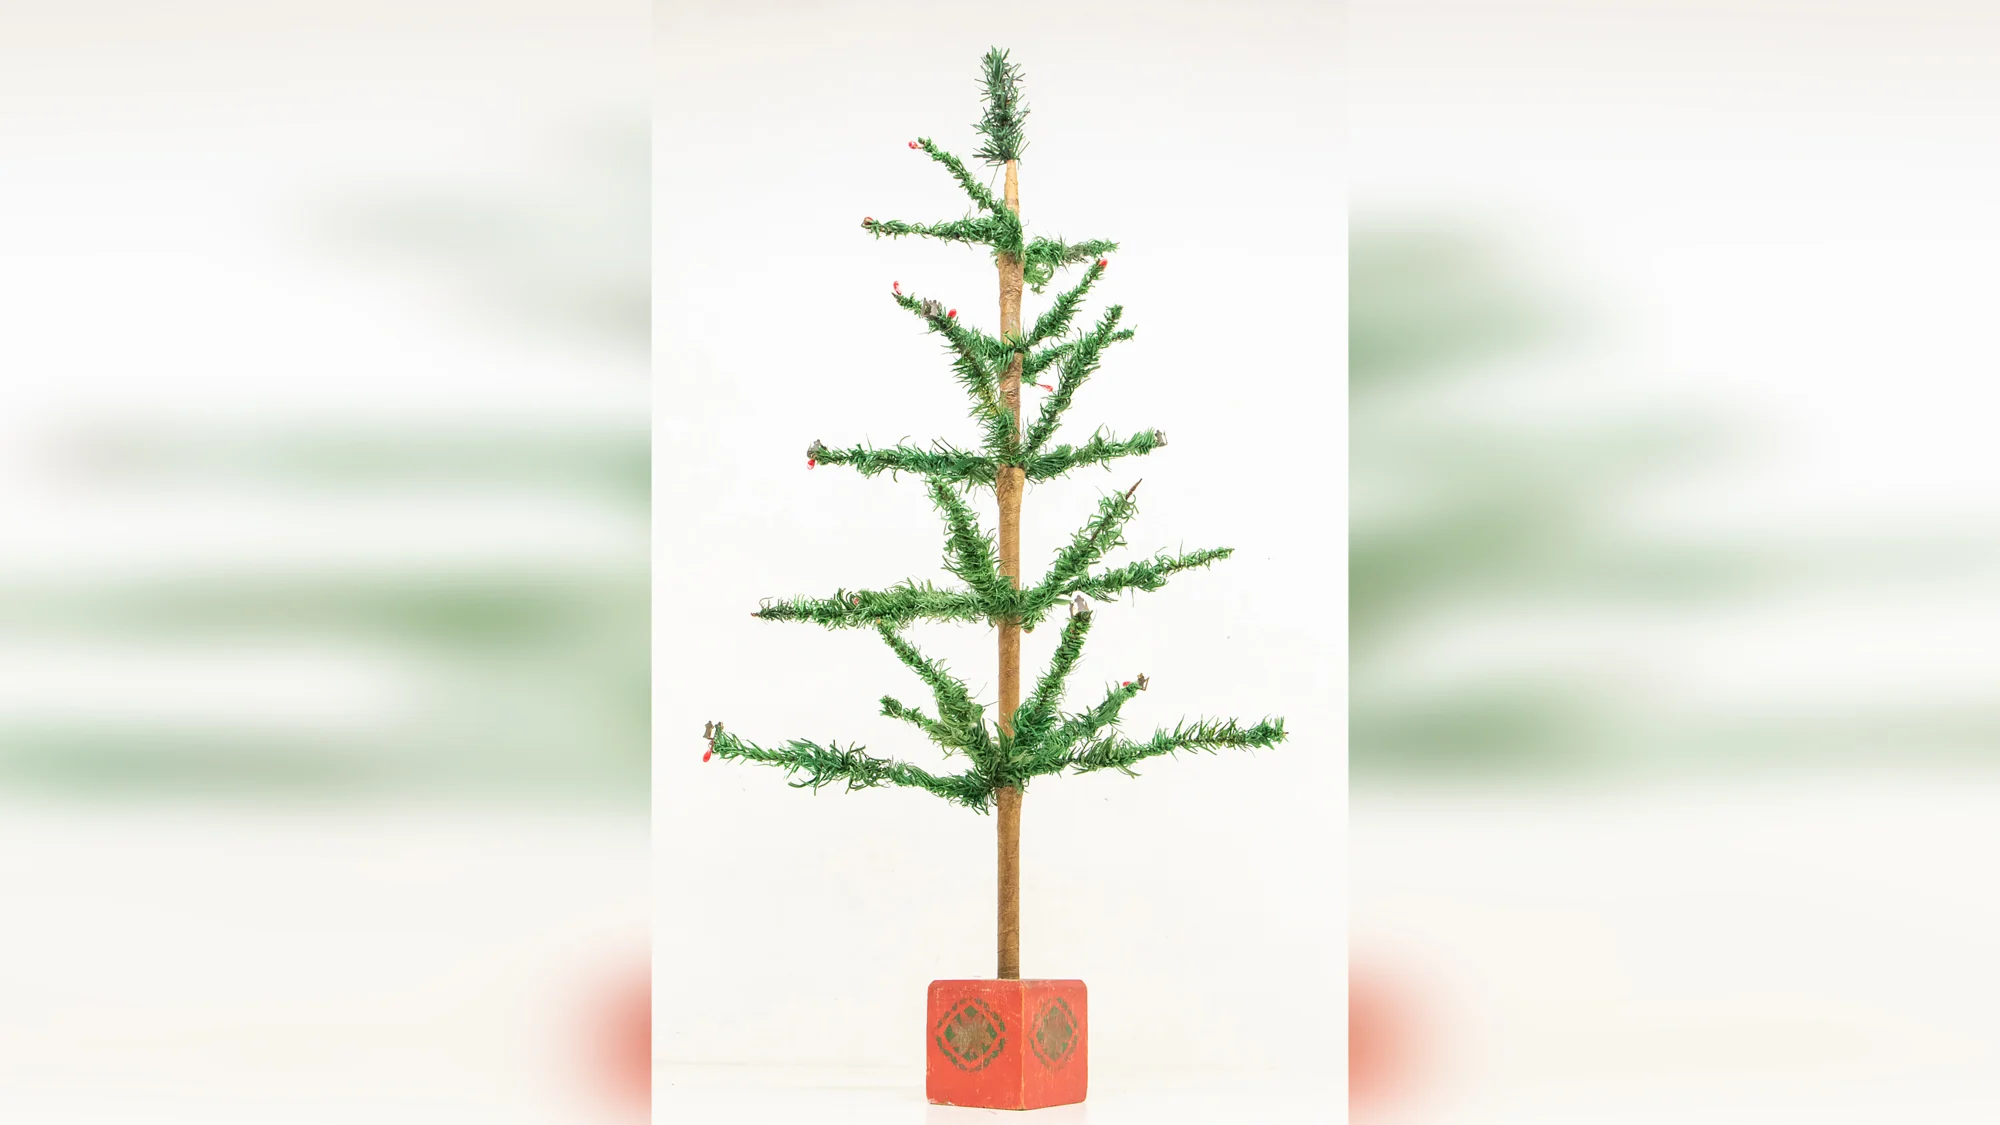 World's ‘humblest' Christmas tree, bought for pennies, sells for $4,000 at auction